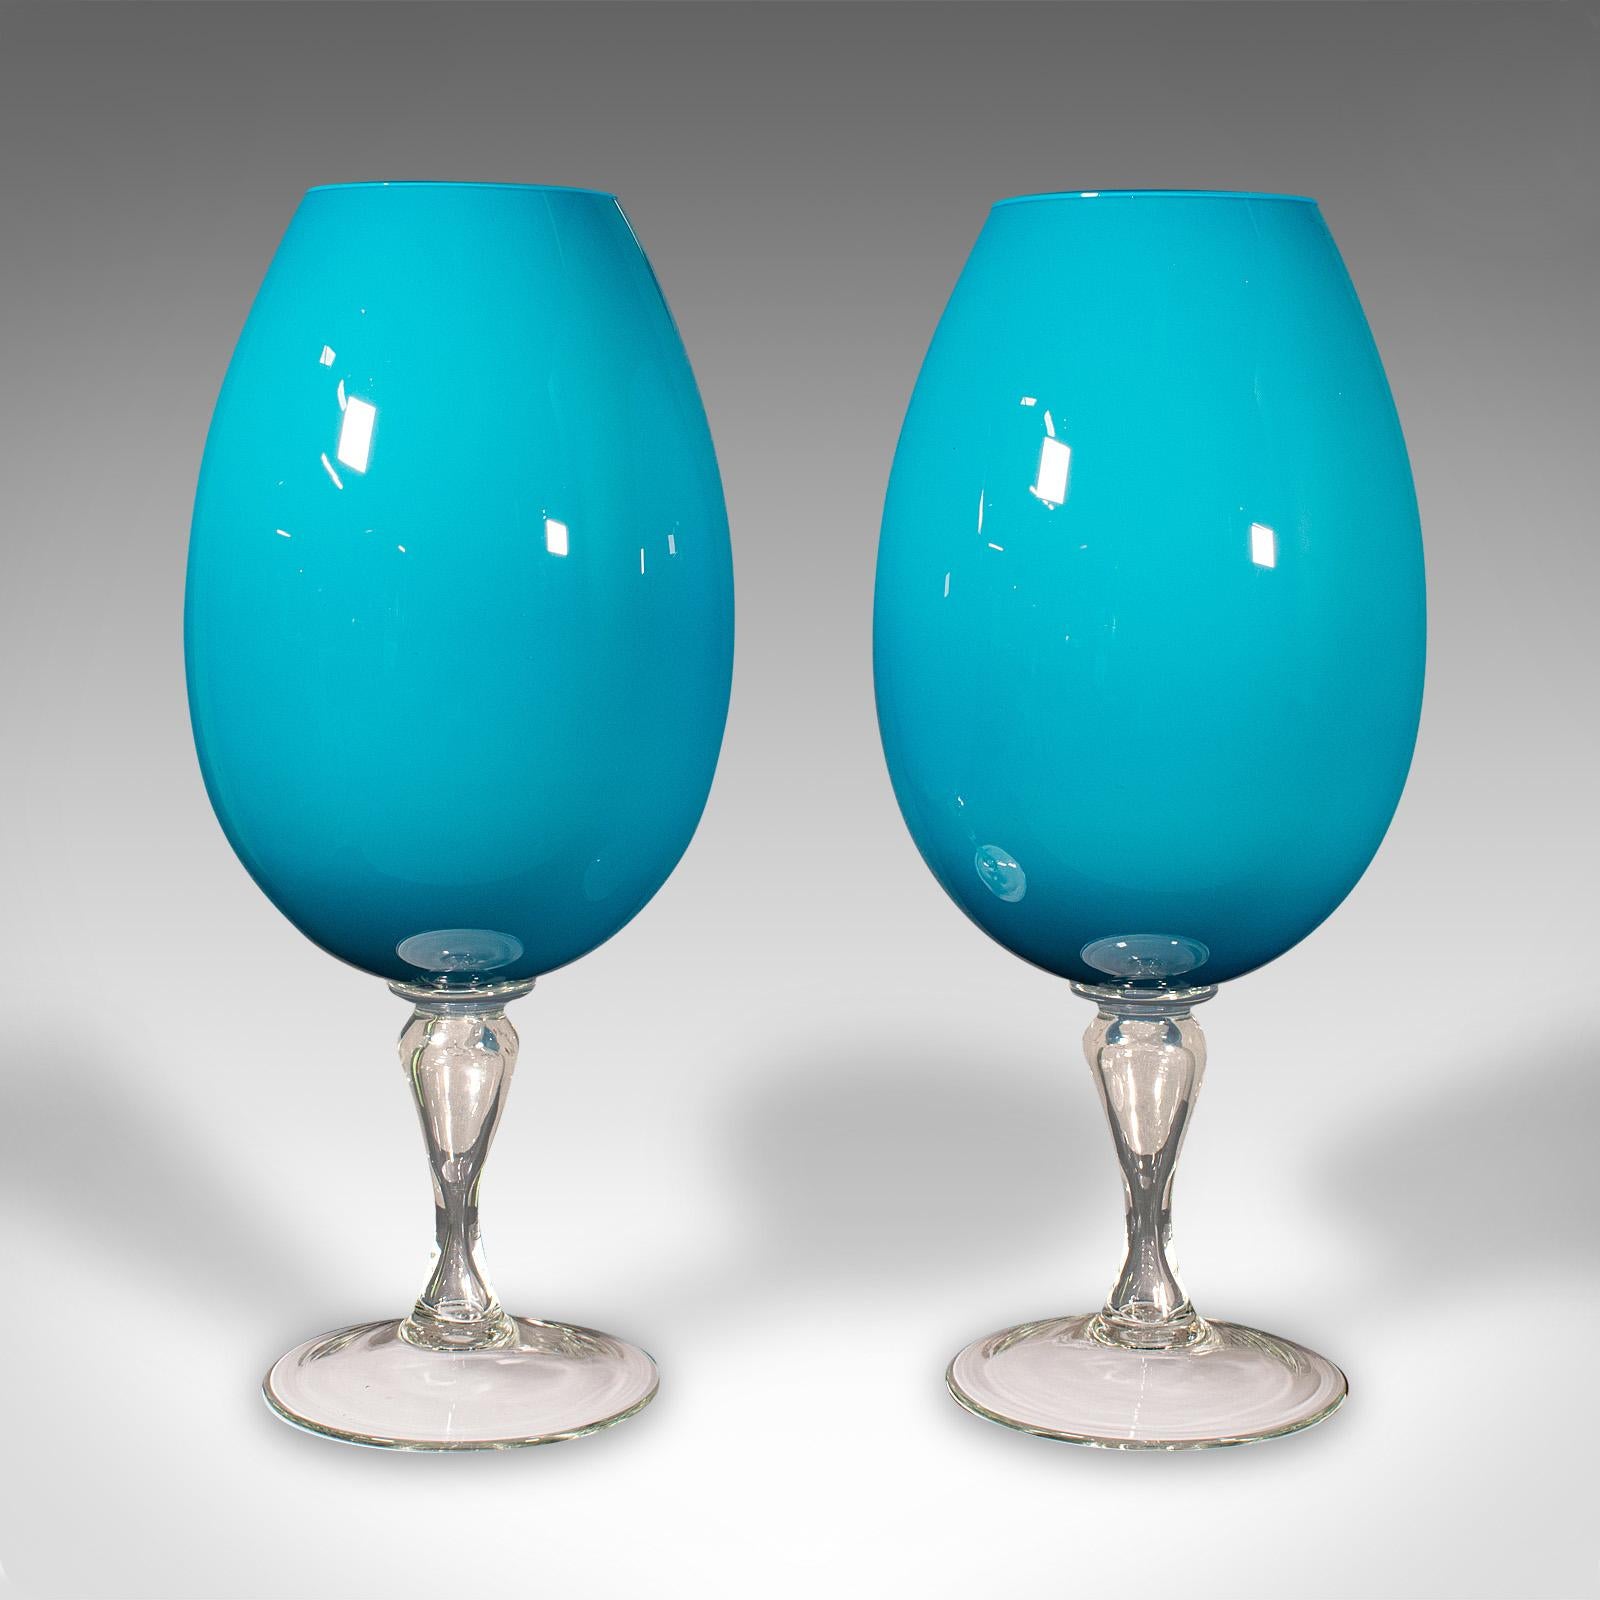 This is a giant pair of vintage wine glasses. An English, decorative glass planter or vase, dating to the late 20th century, circa 1970.

Larger than life vases for the light-hearted wine lover
Displaying a desirable aged patina with one small flaw